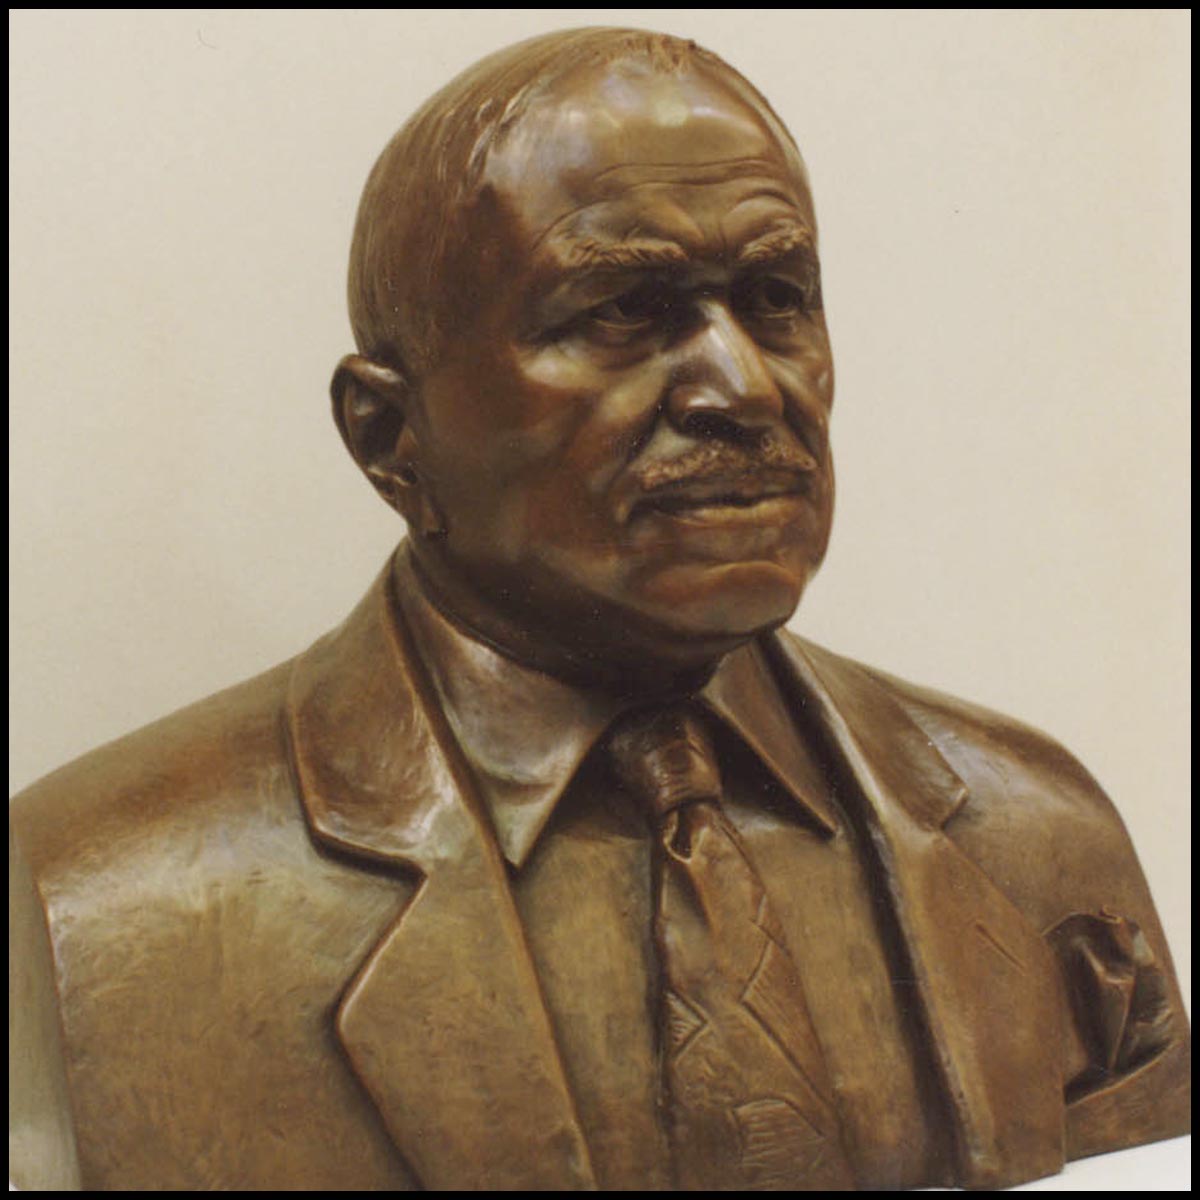 photo of bronze-colored sculpture bust of Eddie Robinson wearing suitcoat and tie against tan background